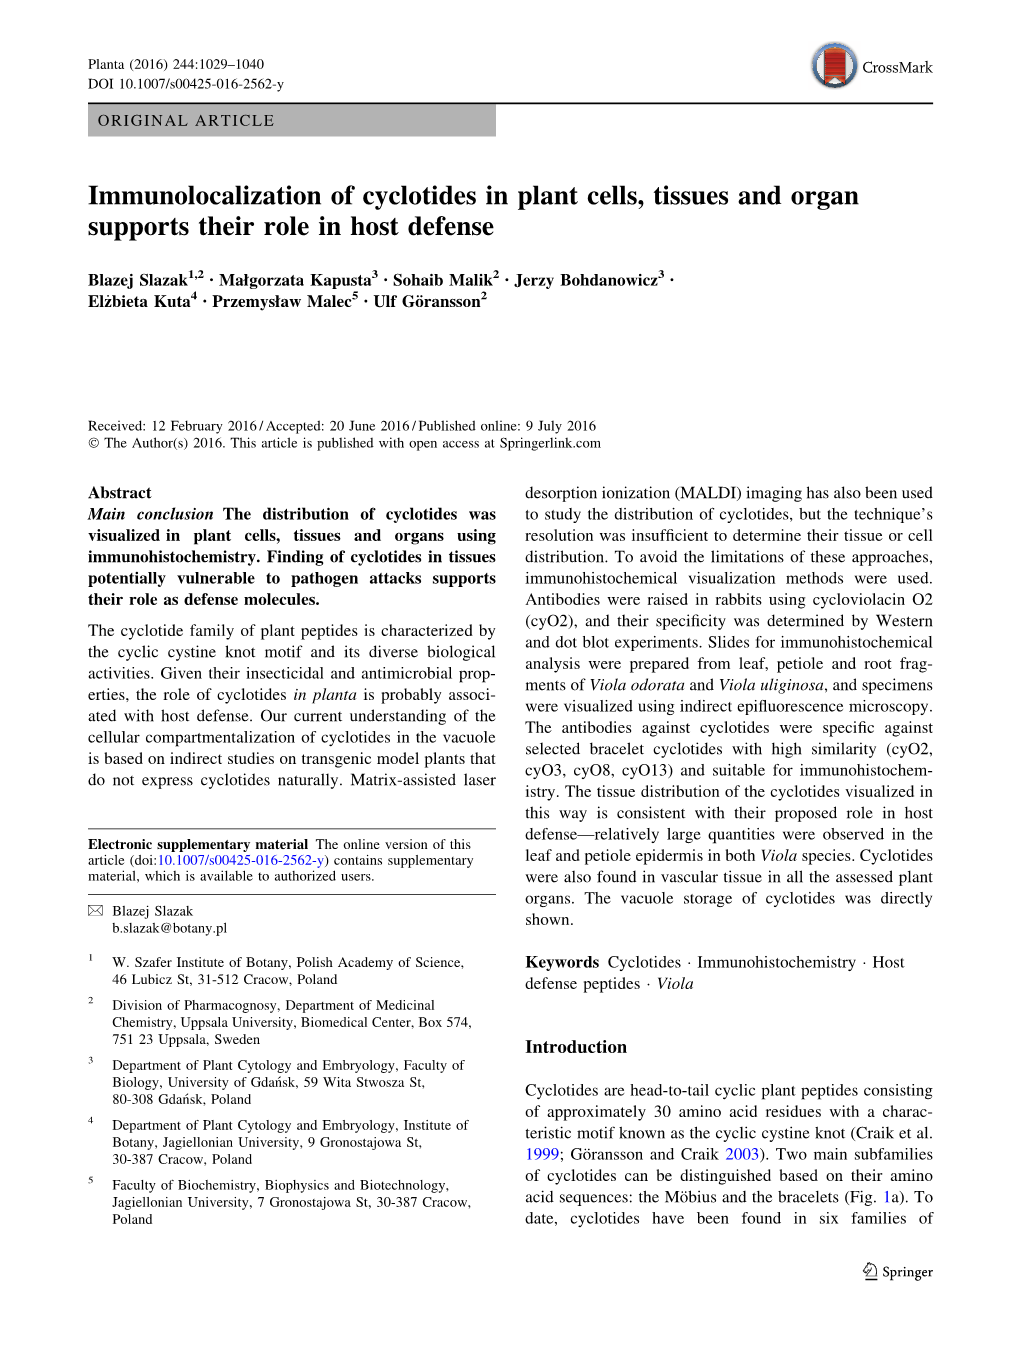 Immunolocalization of Cyclotides in Plant Cells, Tissues and Organ Supports Their Role in Host Defense